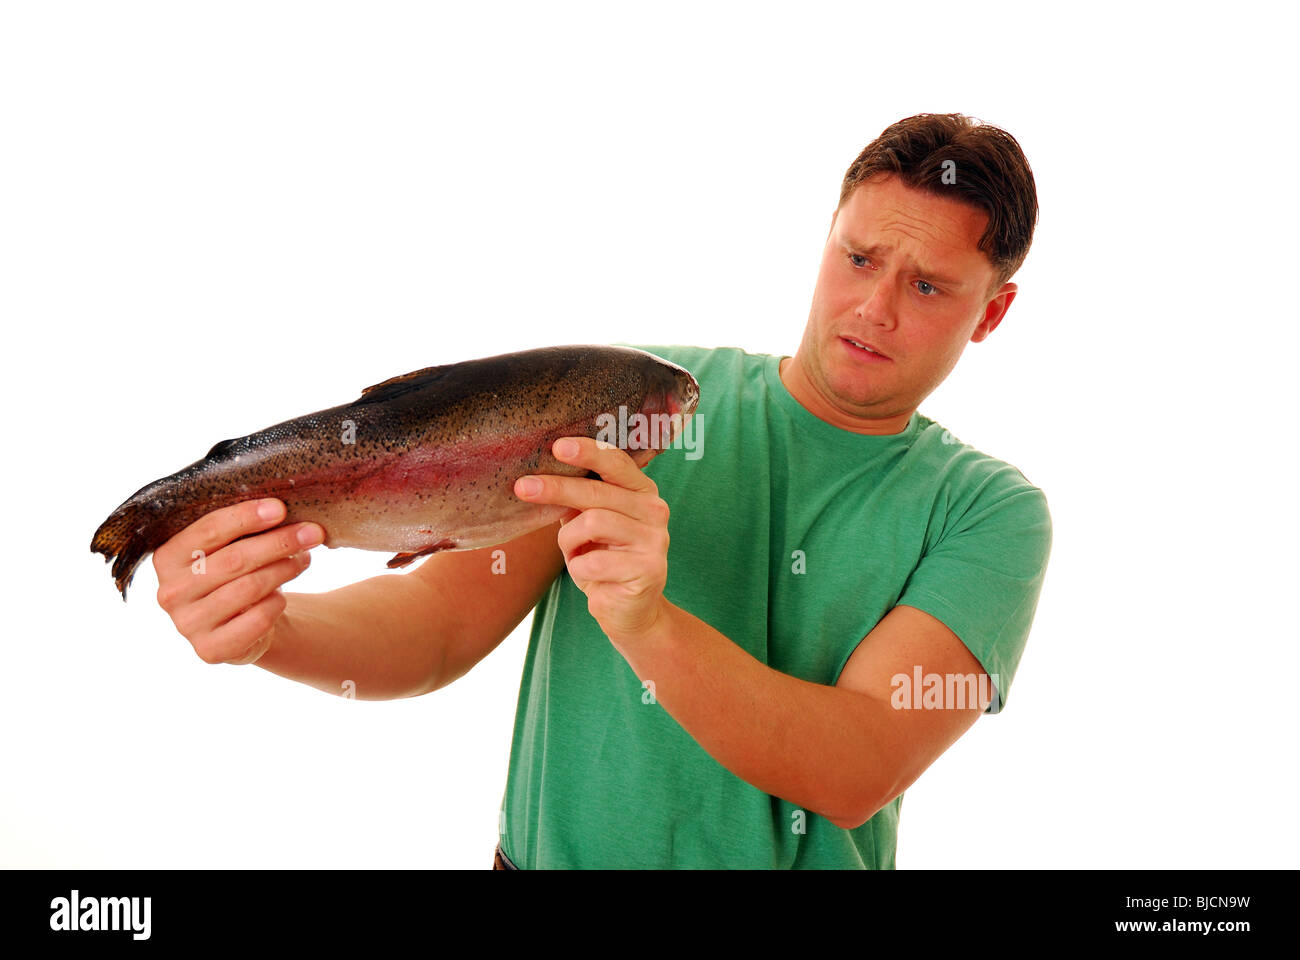 Man holding a large smelly fish Stock Photo